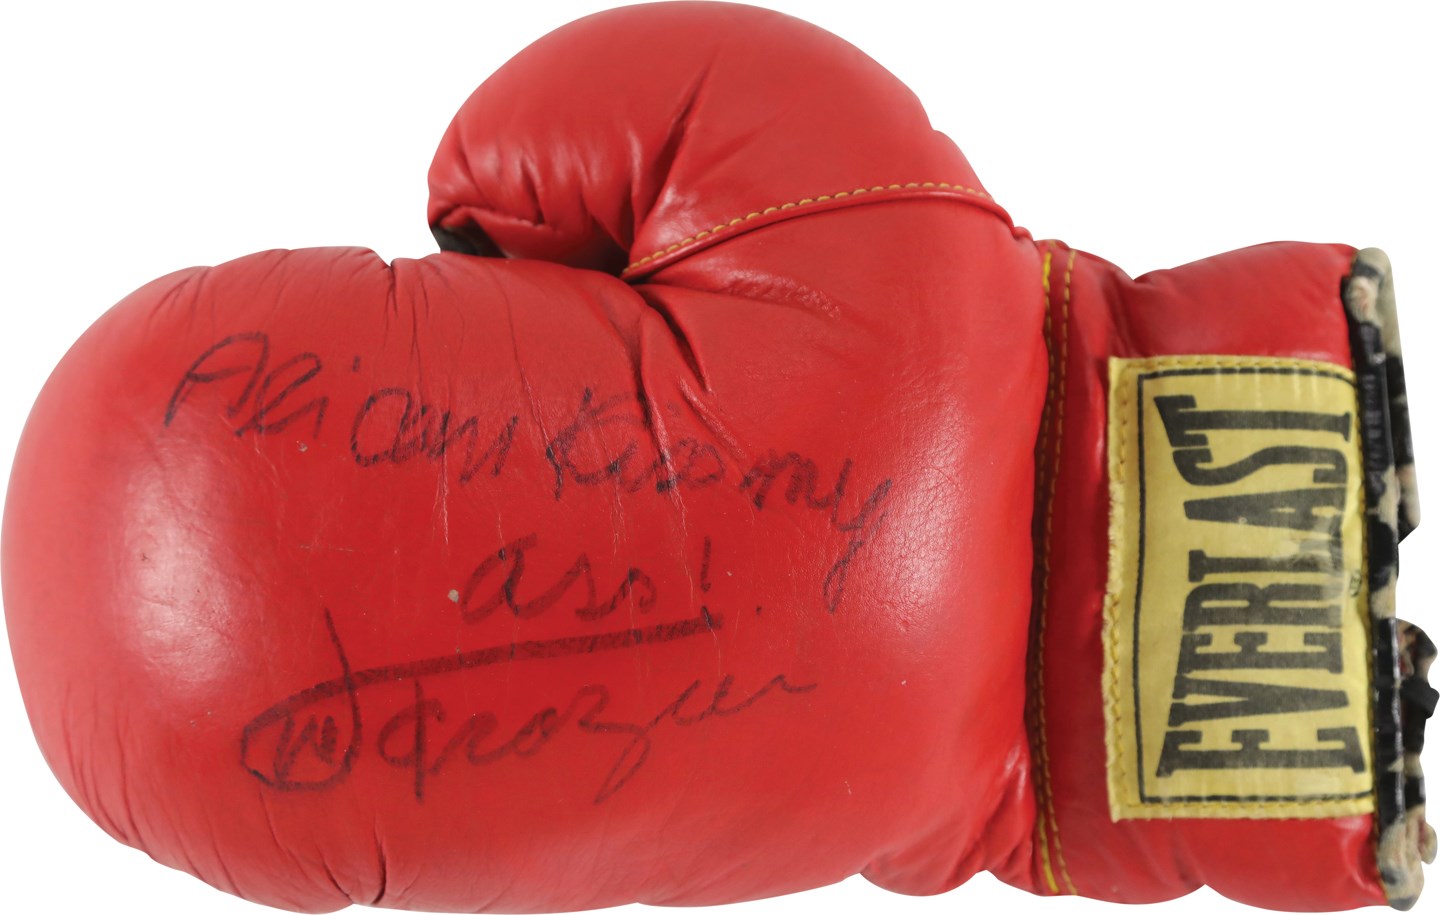 Joe Frazier Signed Boxing Glove - Inscribed "Ali Can Kiss My Ass" (PSA)